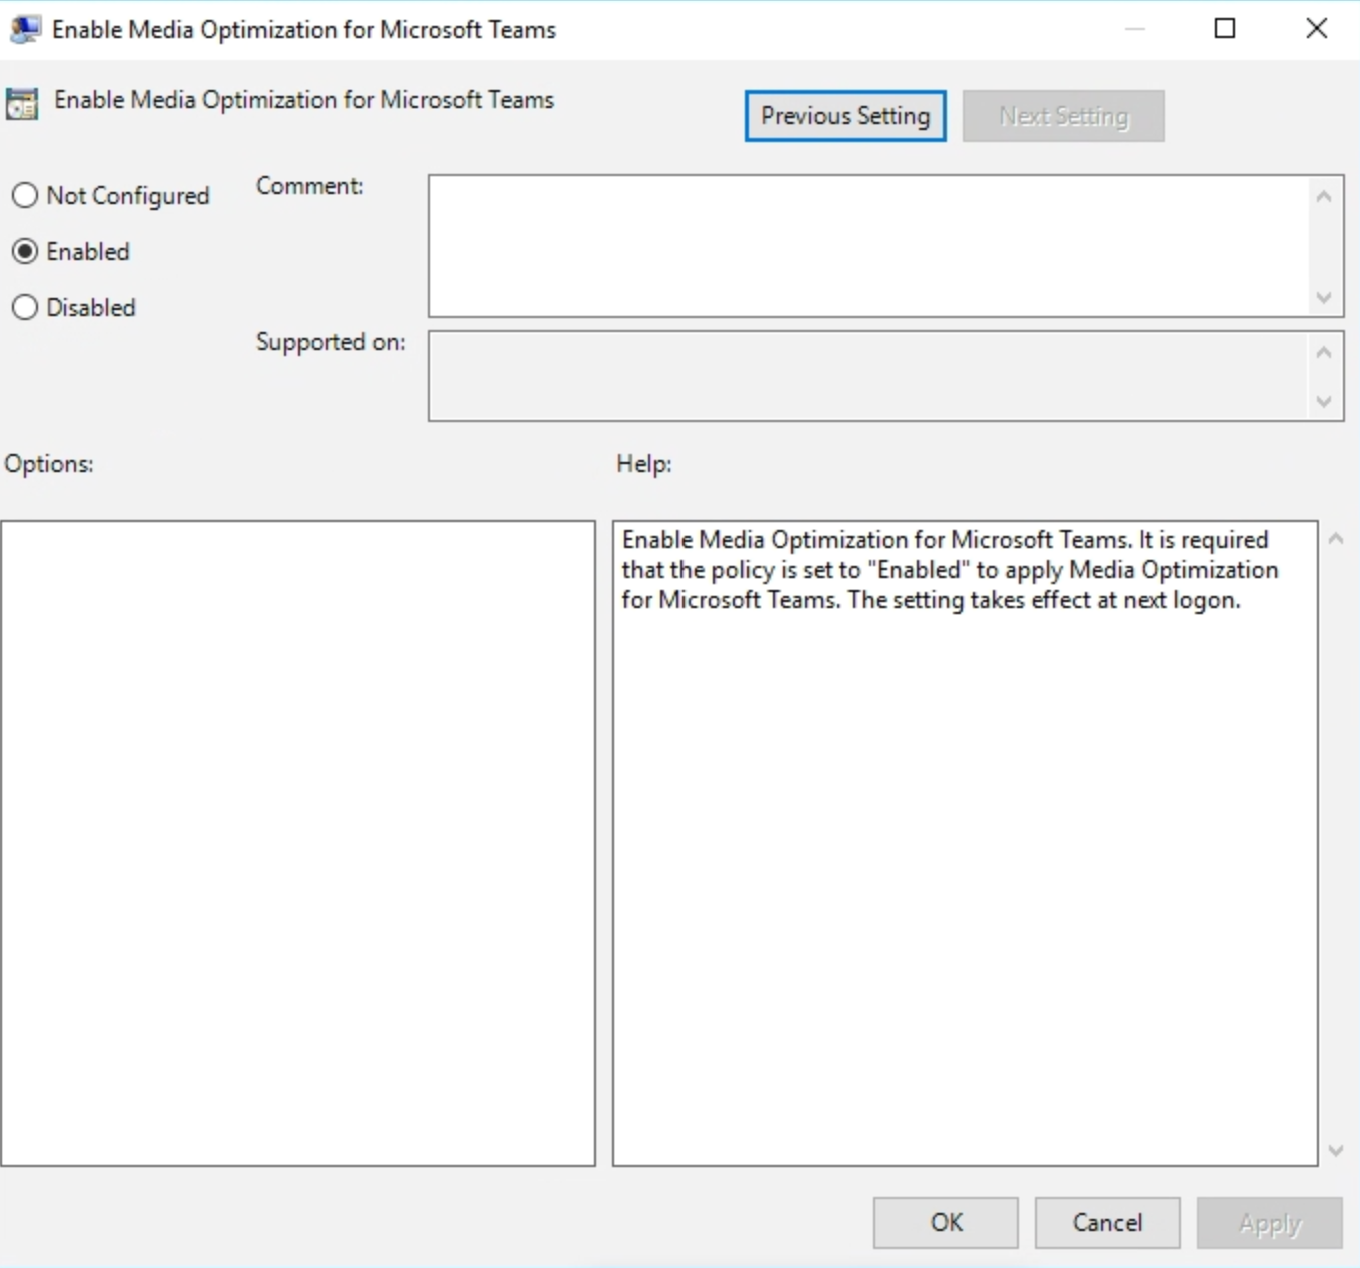 Enable Media Optimization for Microsoft Teams policy setting